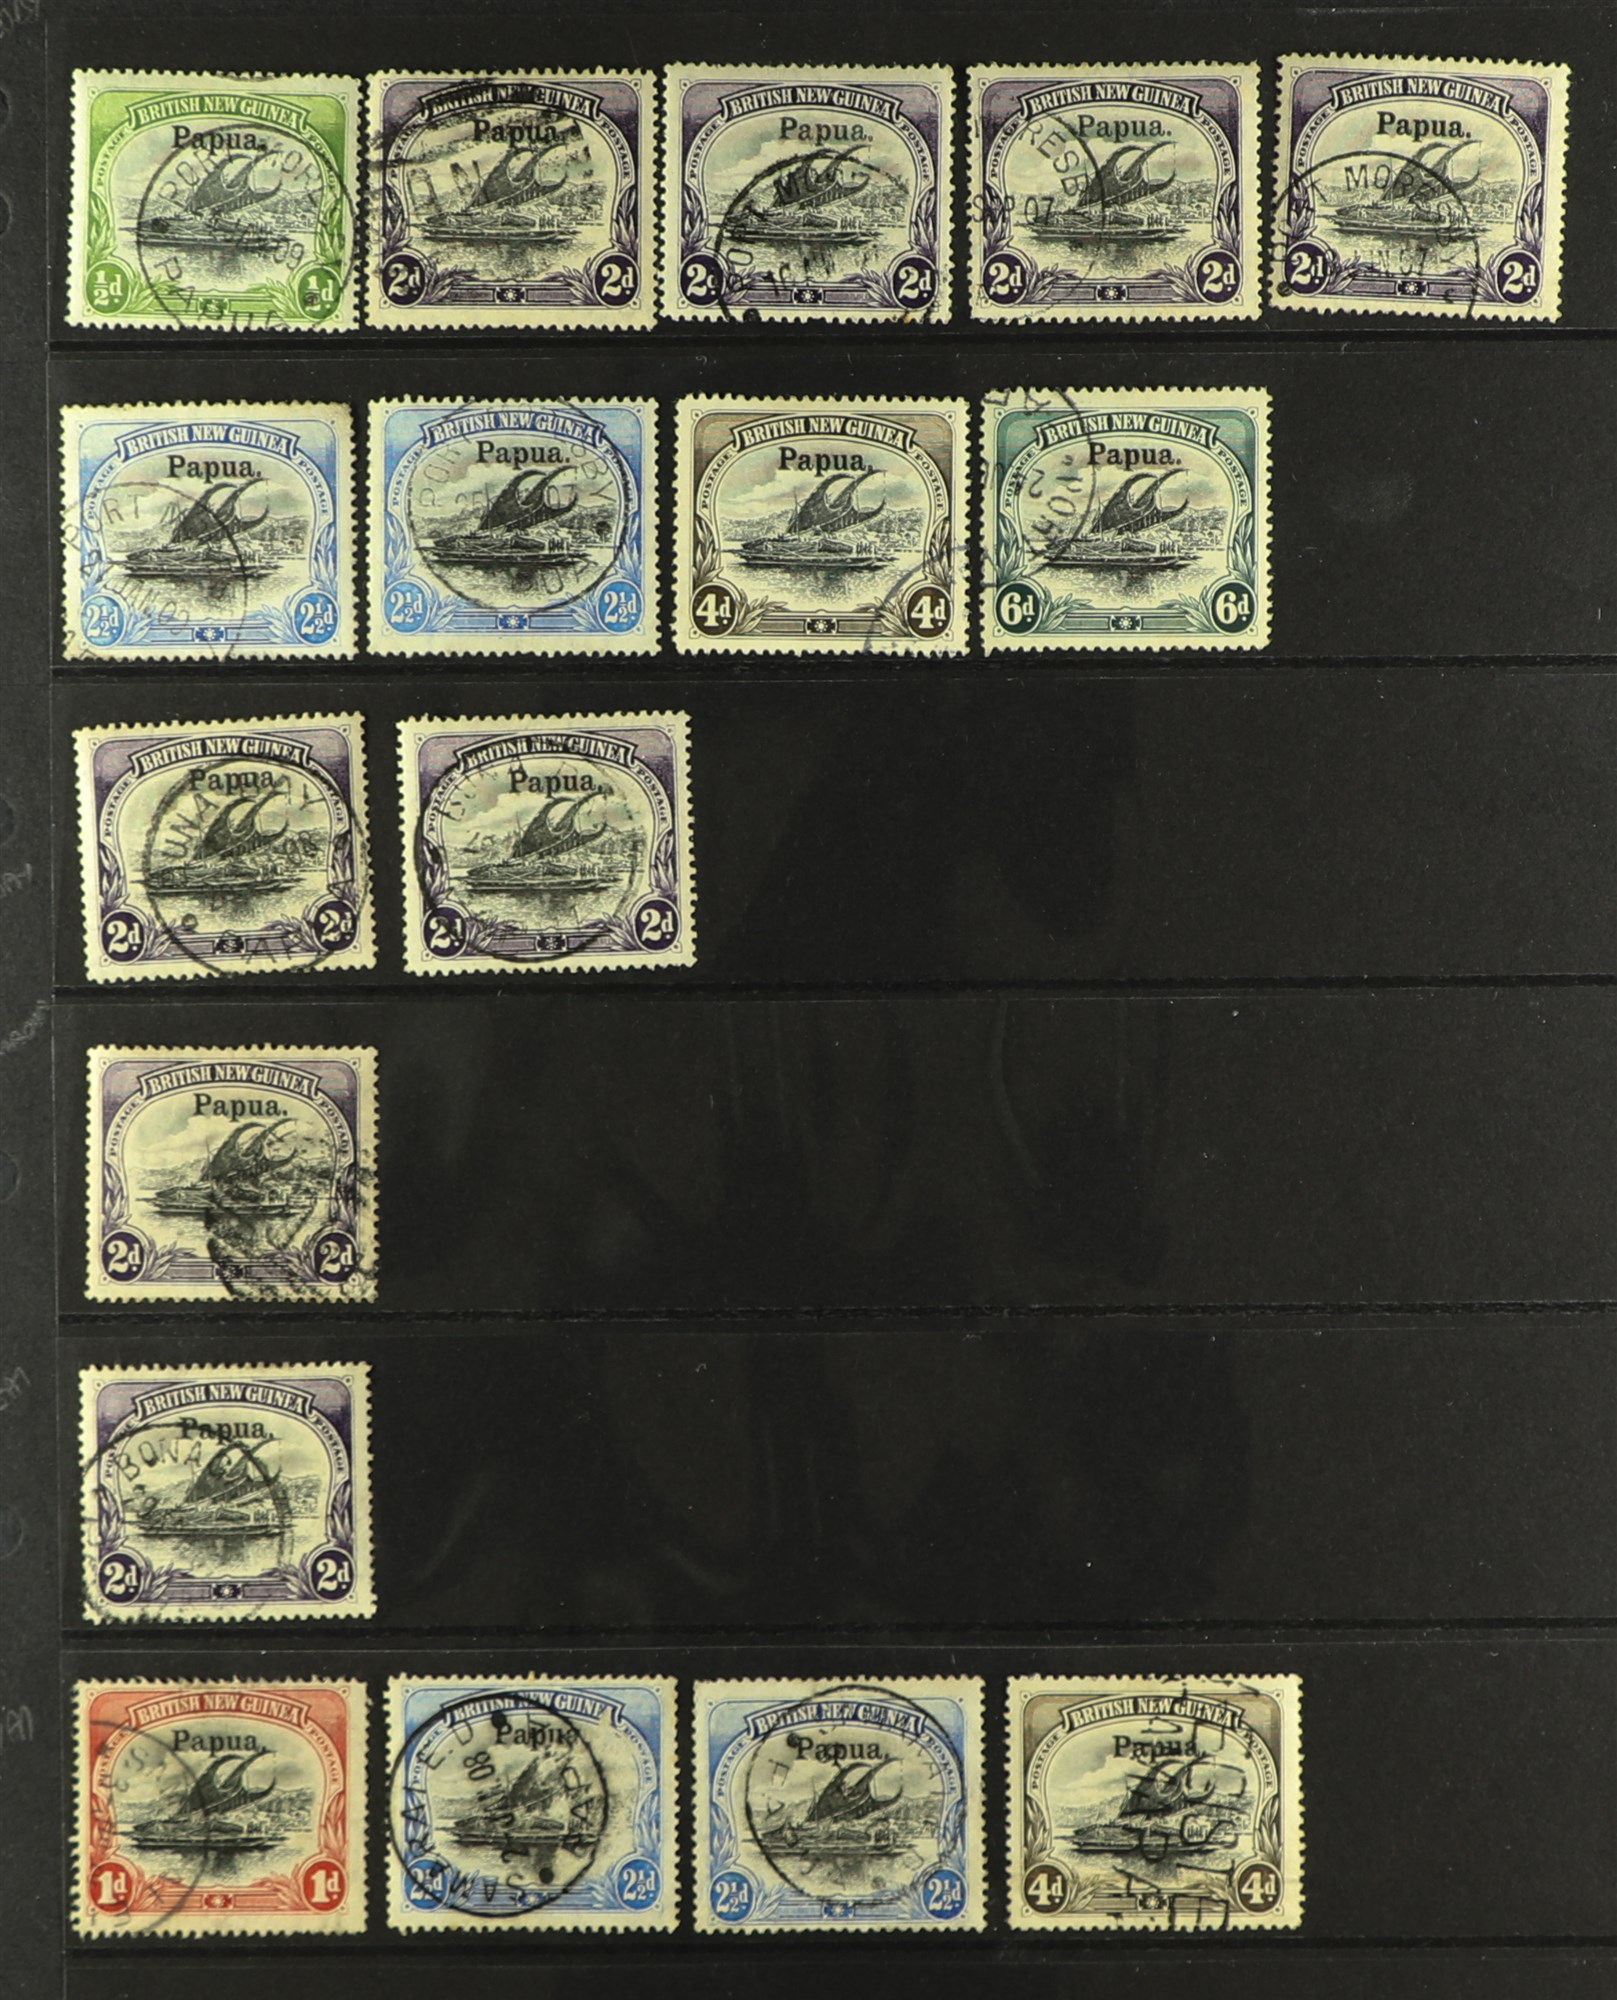 PAPUA POSTMARKS on 1906 large "Papua" overprinted Lakatoi issues, group of postmarks incl. Port